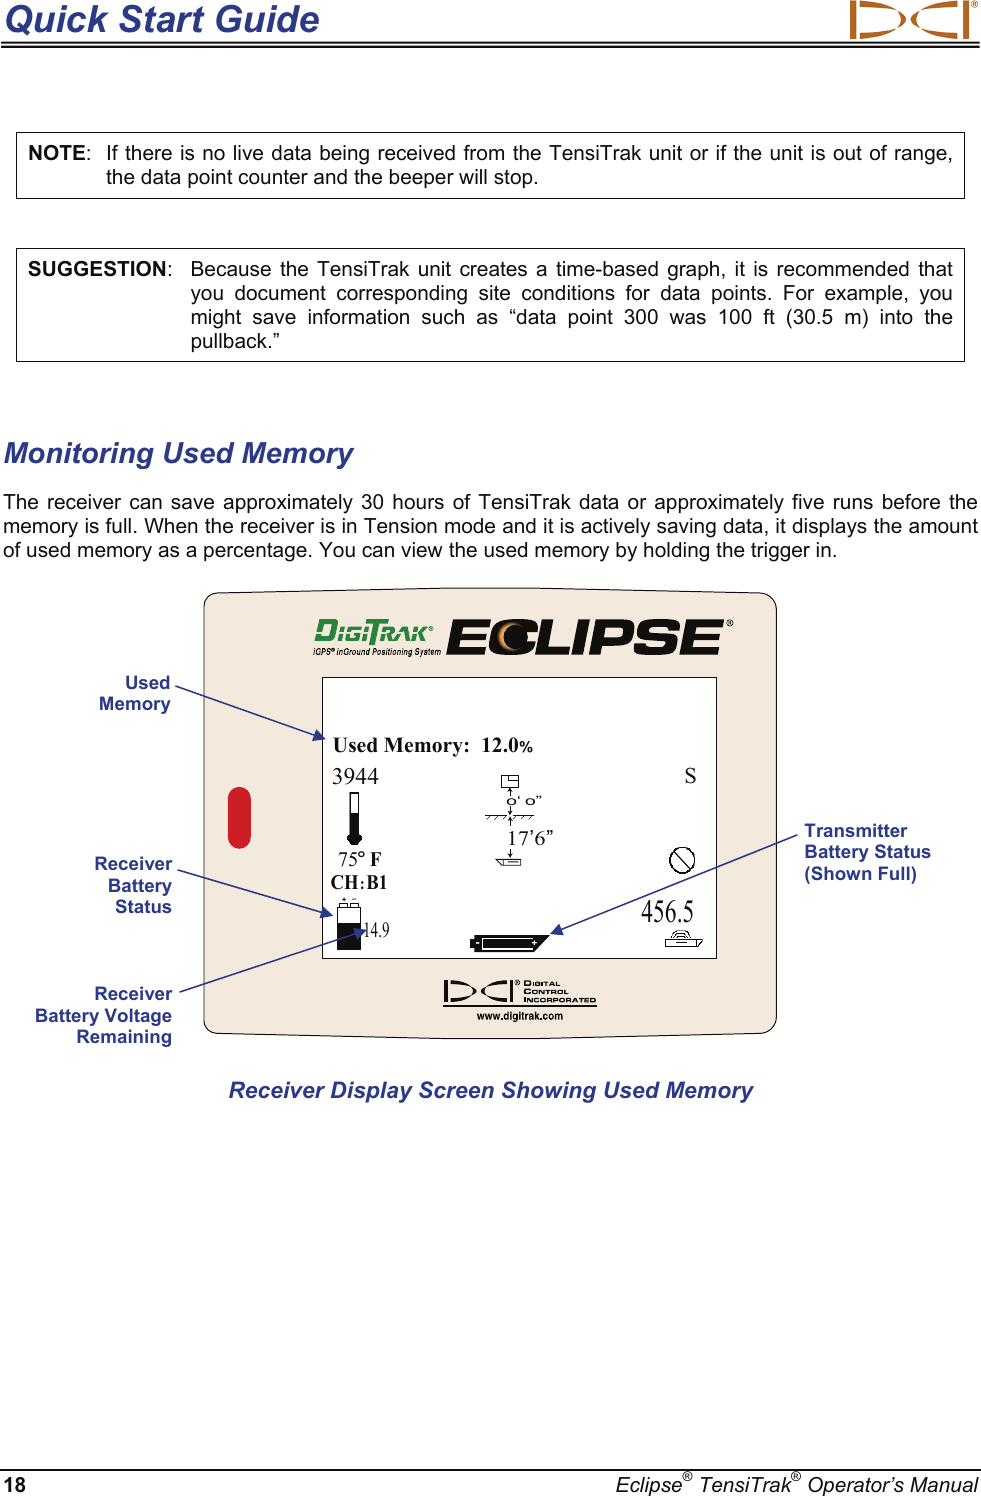 Quick Start Guide  18  Eclipse® TensiTrak® Operator’s Manual NOTE:  If there is no live data being received from the TensiTrak unit or if the unit is out of range, the data point counter and the beeper will stop.  SUGGESTION:  Because the TensiTrak unit creates a time-based graph, it is recommended that you document corresponding site conditions for data points. For example, you might save information such as “data point 300 was 100 ft (30.5 m) into the pullback.”  Monitoring Used Memory The receiver can save approximately 30 hours of TensiTrak data or approximately five runs before the memory is full. When the receiver is in Tension mode and it is actively saving data, it displays the amount of used memory as a percentage. You can view the used memory by holding the trigger in. 456.5CH:B175oFUsed Memory:  12.0%3944S-+o‘ o’’17’6’’14.9+– Receiver Display Screen Showing Used Memory Used Memory Receiver Battery Status Receiver Battery Voltage Remaining Transmitter Battery Status (Shown Full) 